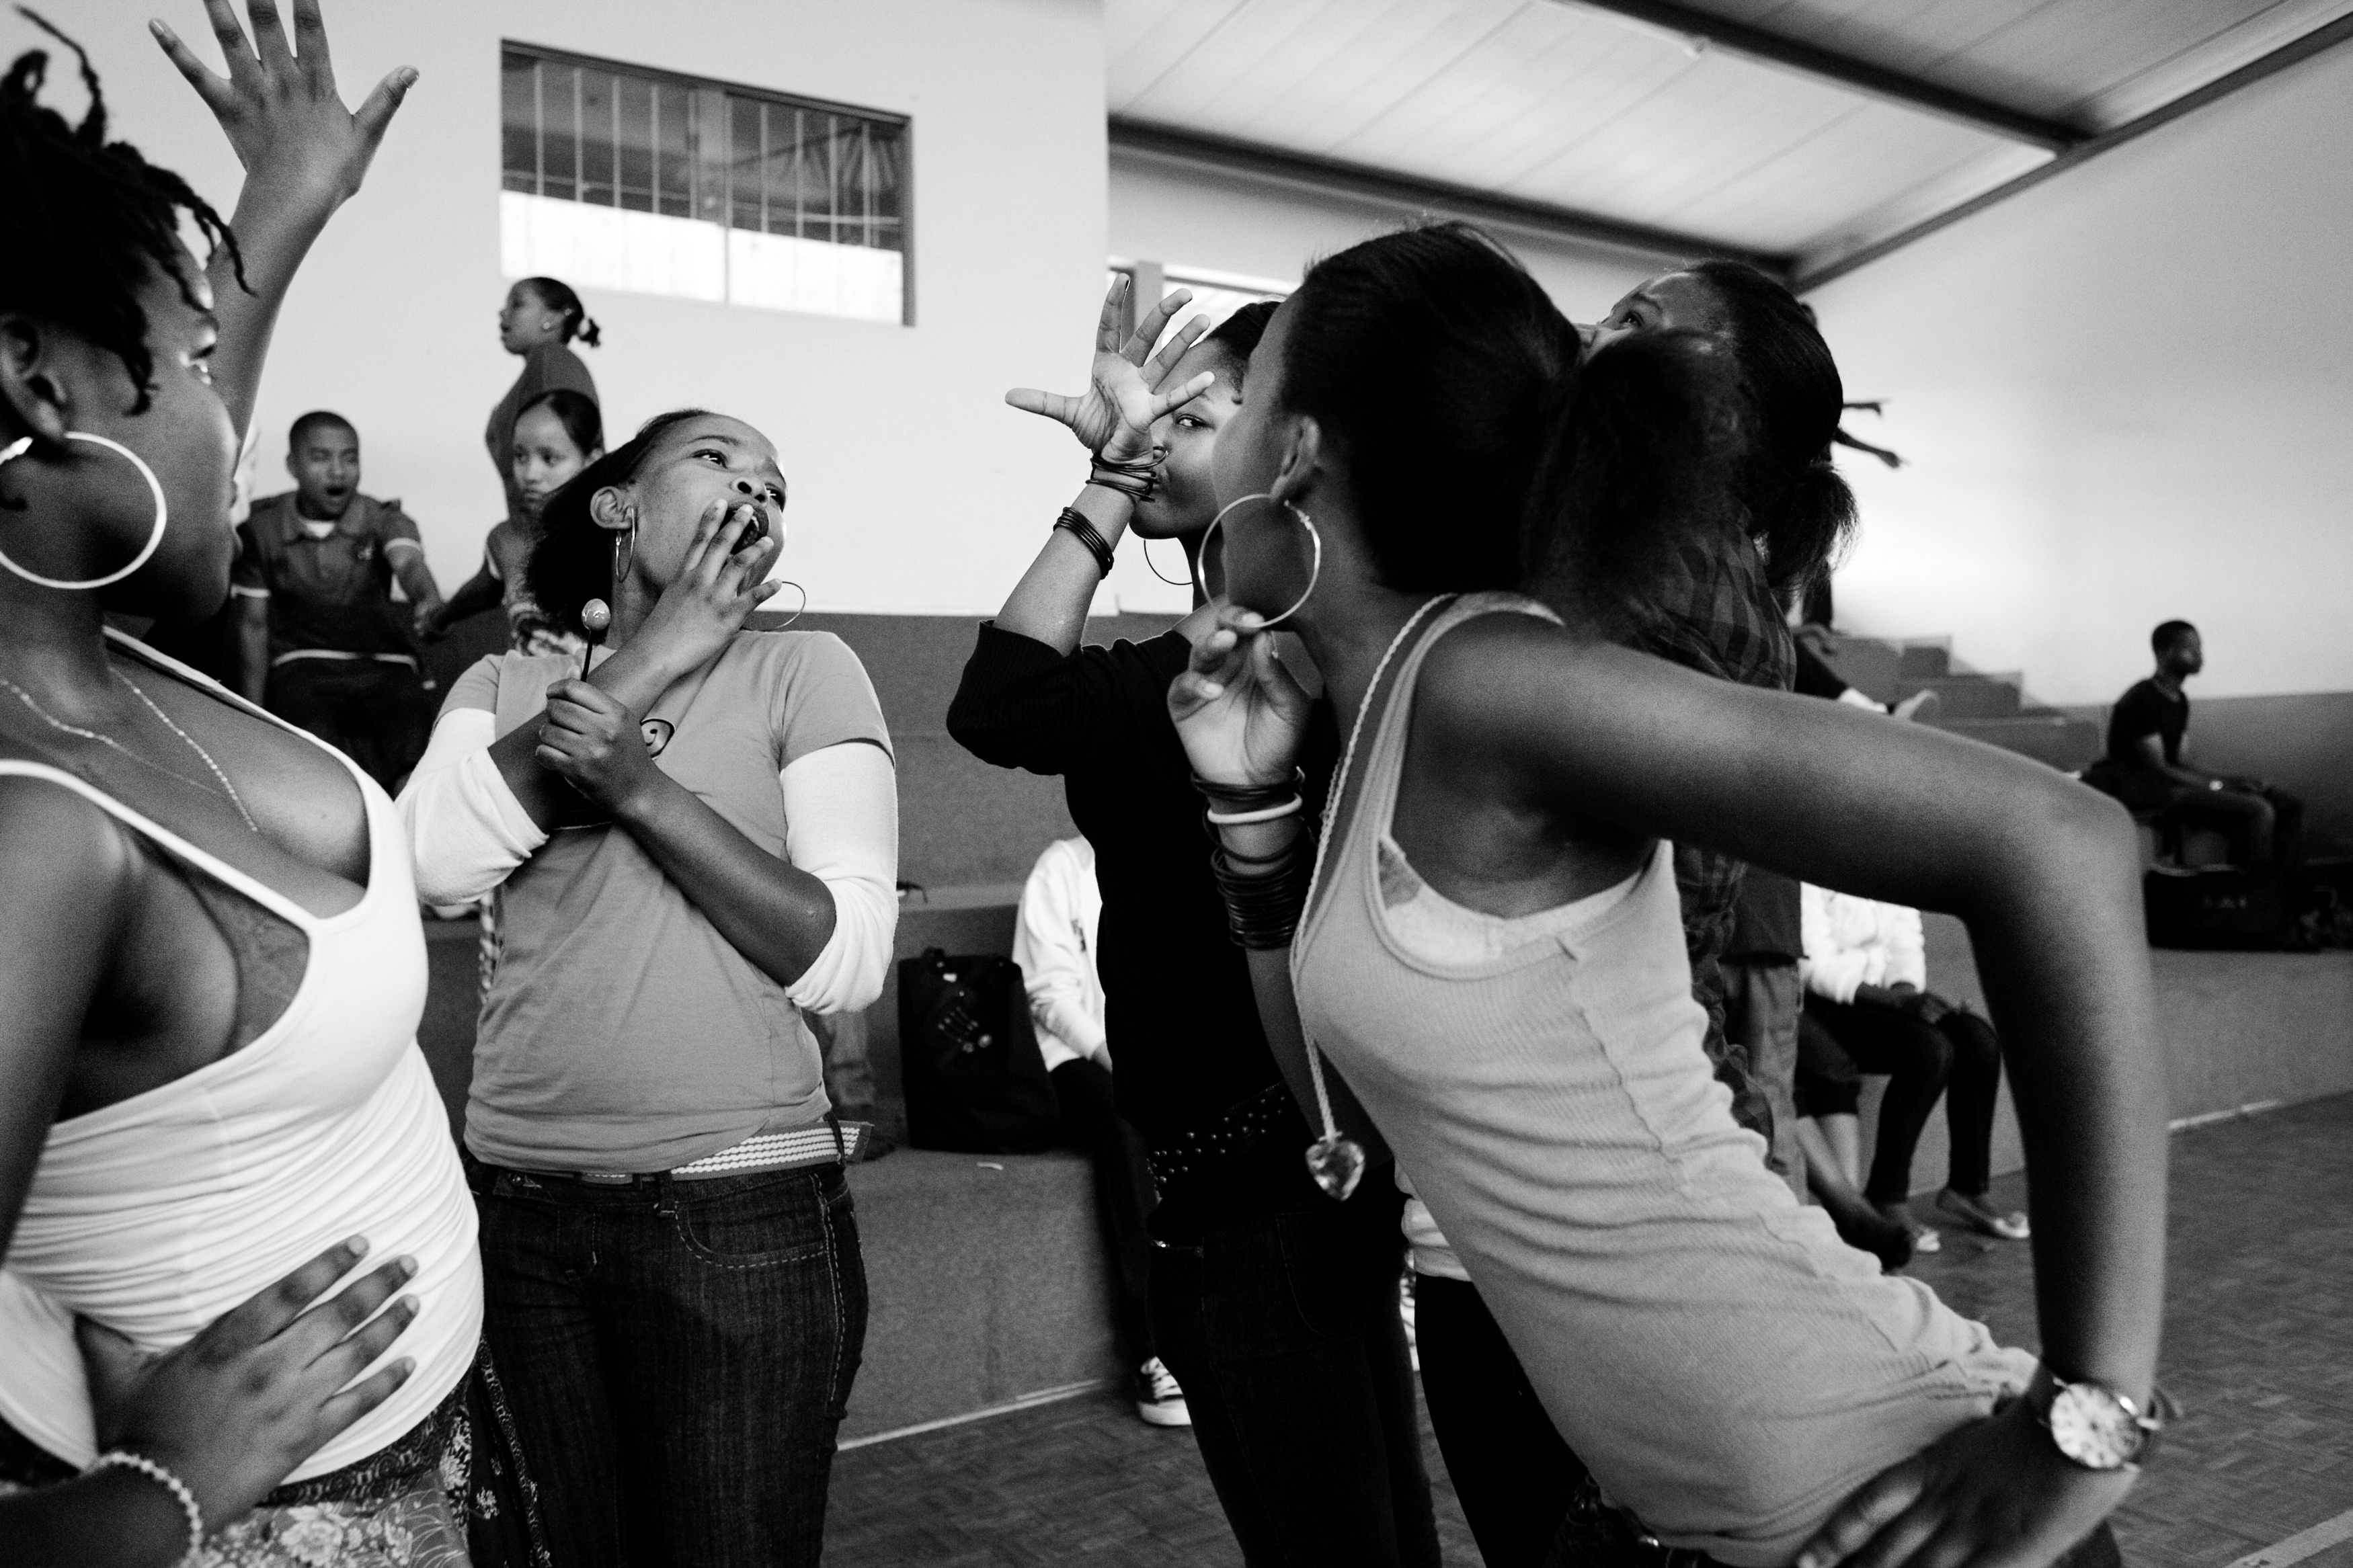 High school girls joke and dance to music during a hip hop dance competition held at a private high school in Swaziland. While some Swazis can afford private education, two thirds of Swazis live below the poverty line.